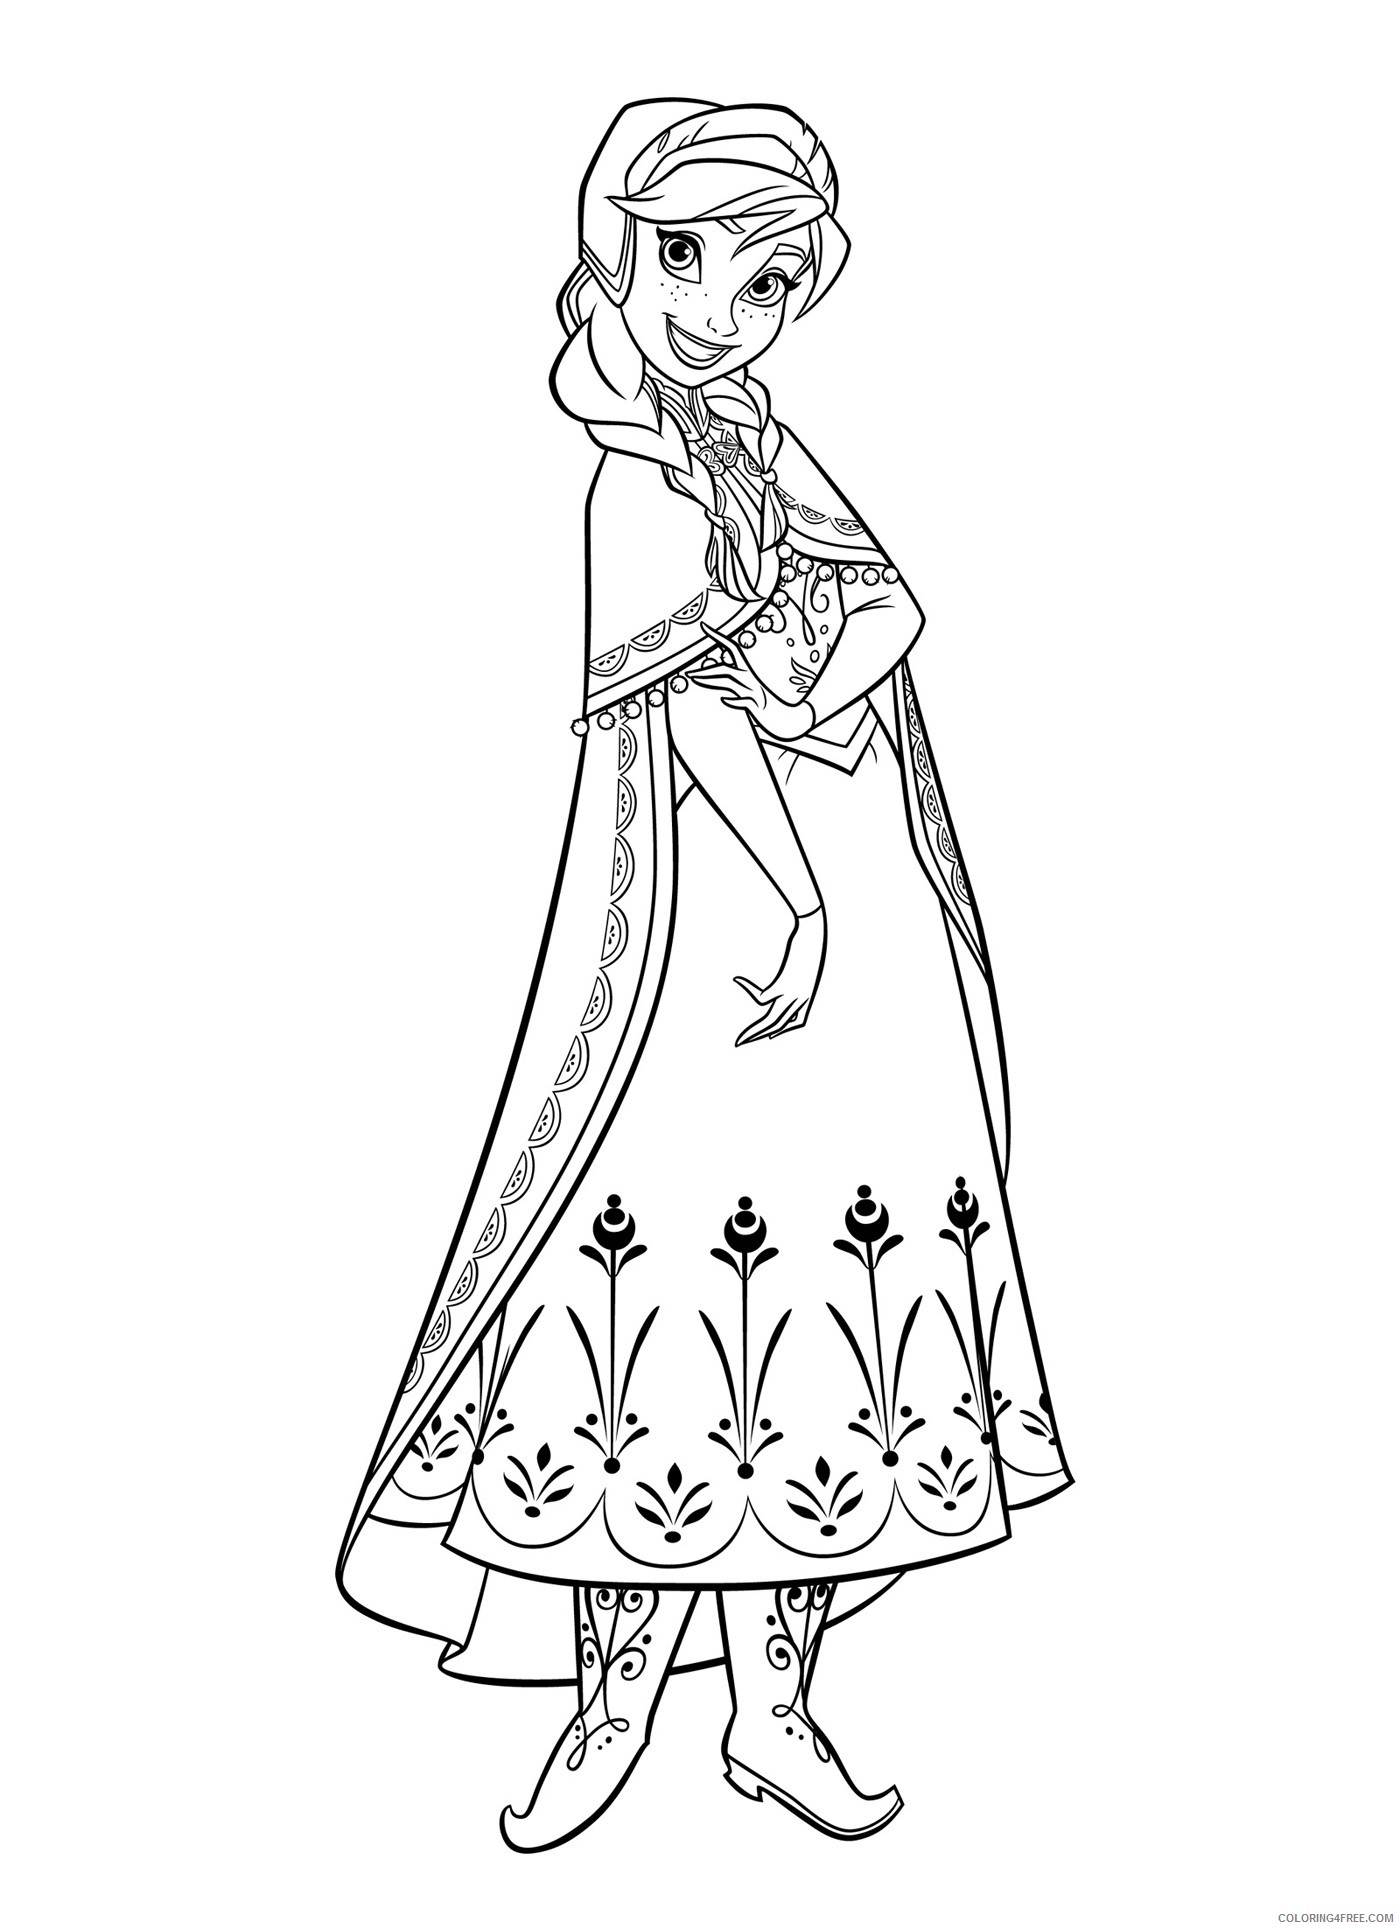 anna coloring pages for kids Coloring4free